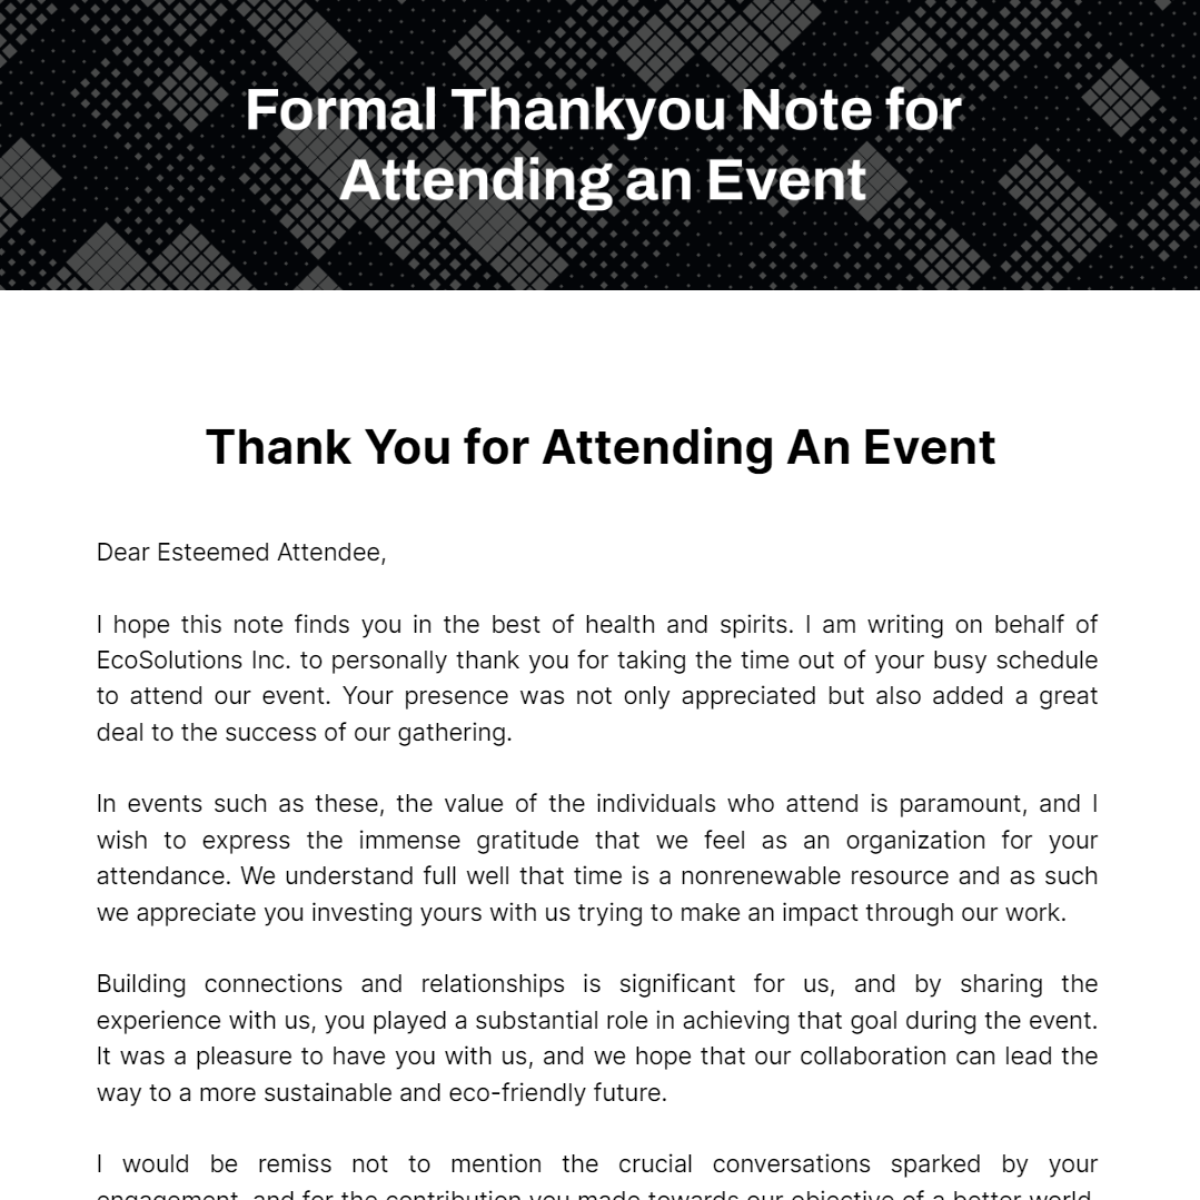 Free Formal Thankyou Note for Attending an Event Template